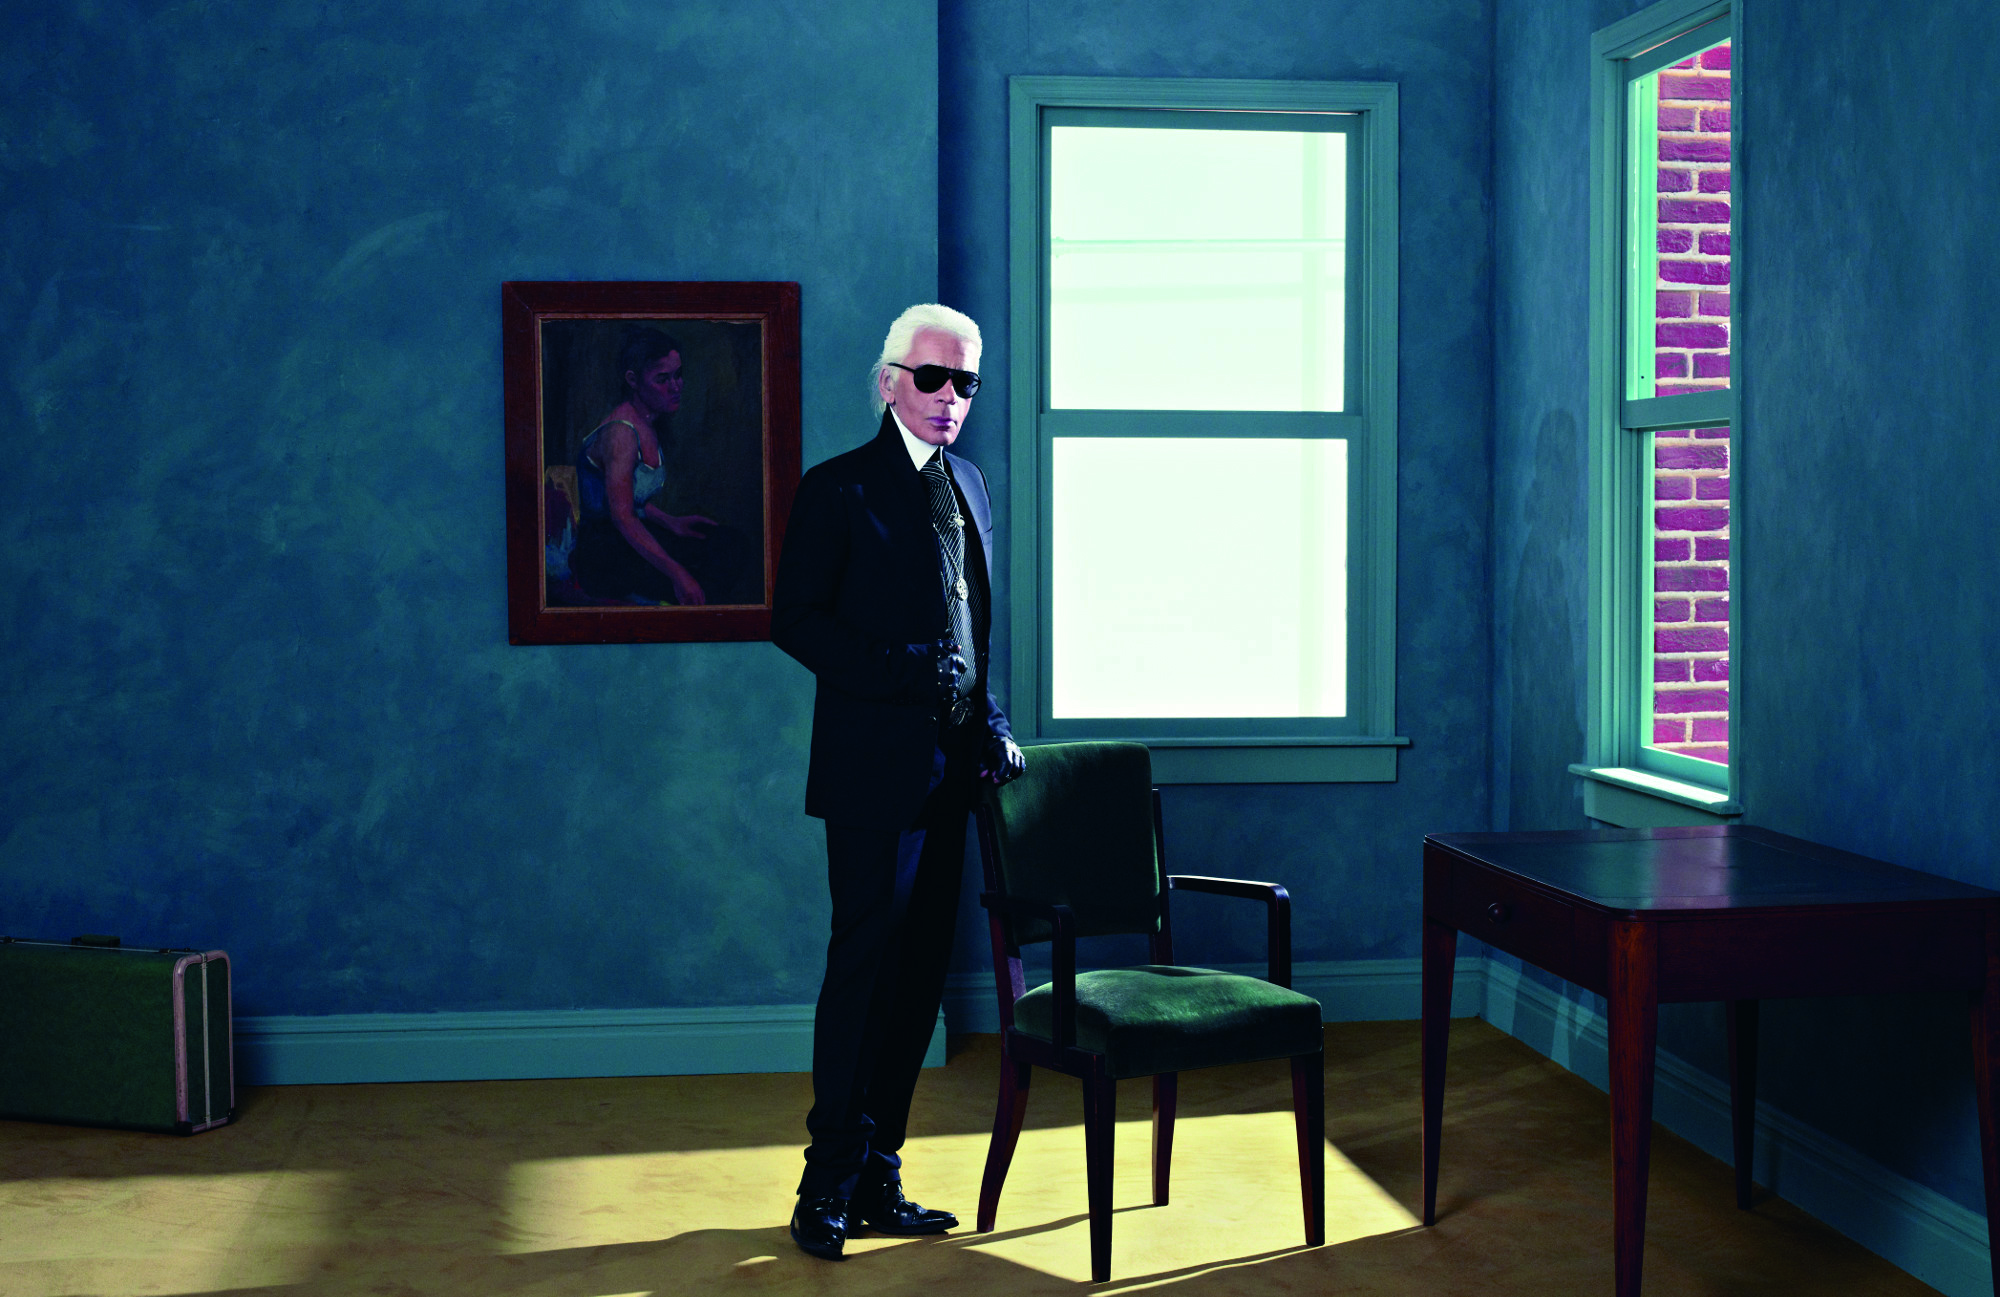 KARL LAGERFELD, A VISUAL JOURNEY